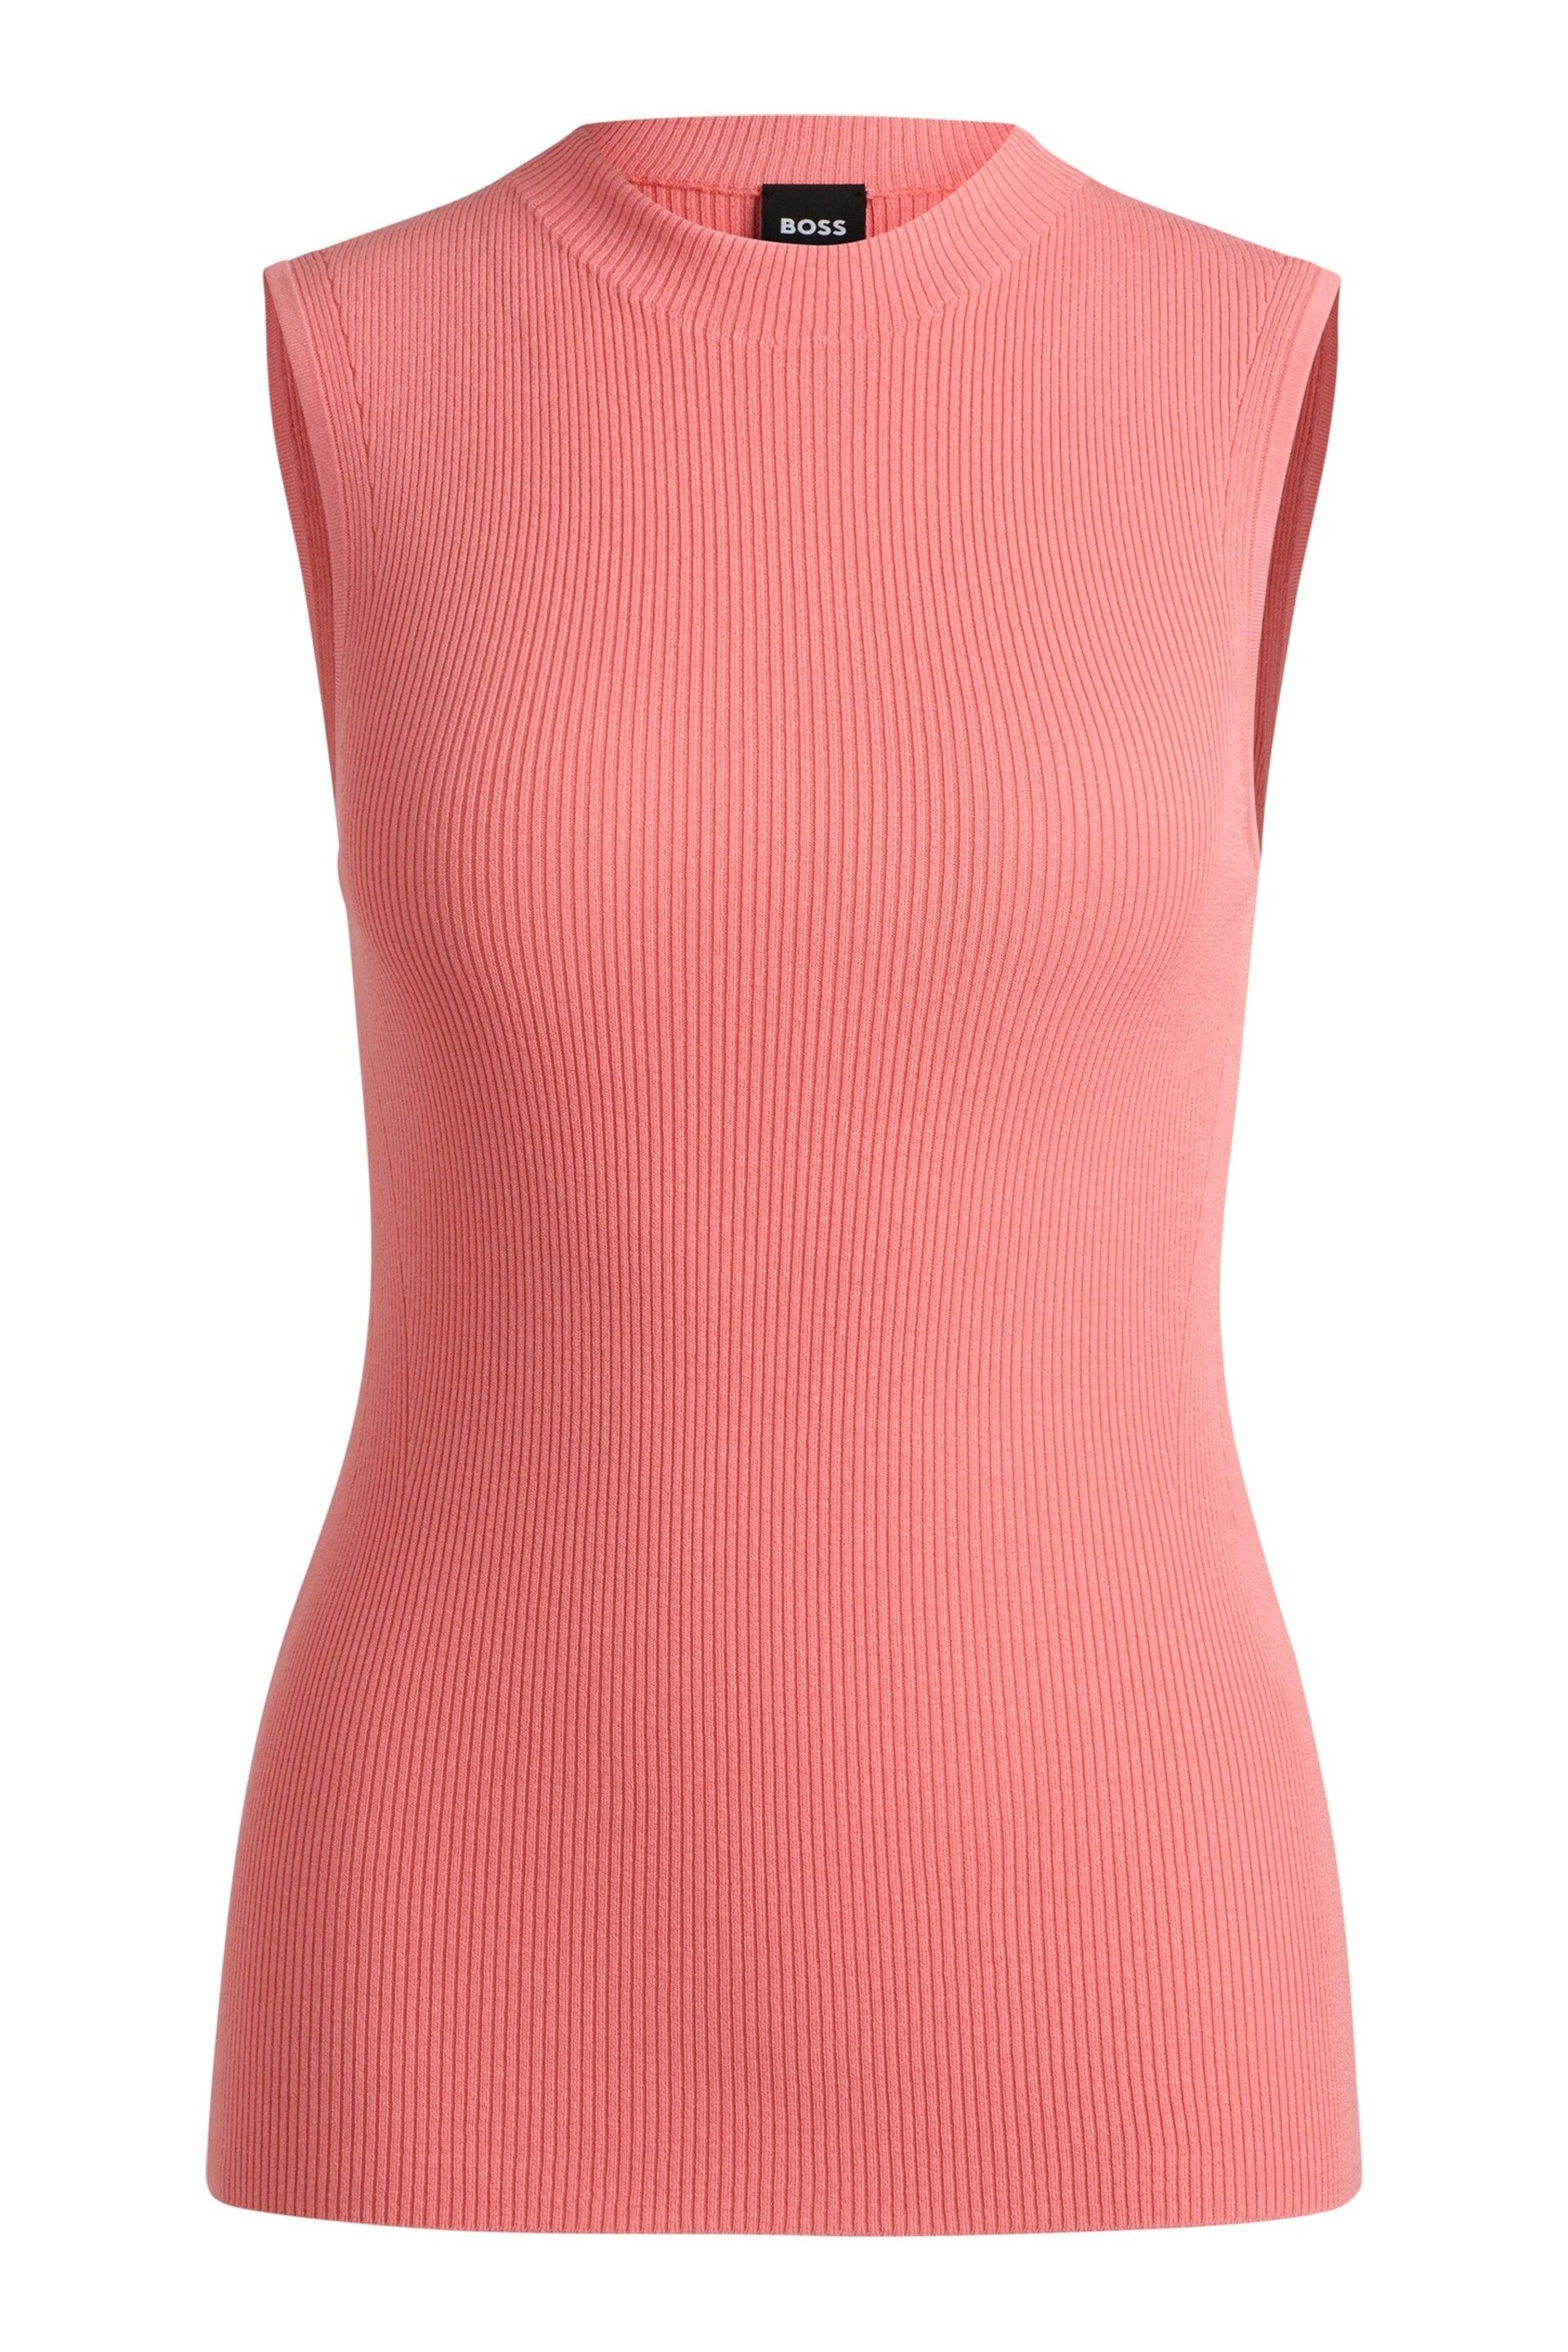 BOSS Pink Slim Fit Rib Sleeveless Knitted Top - Image 5 of 5